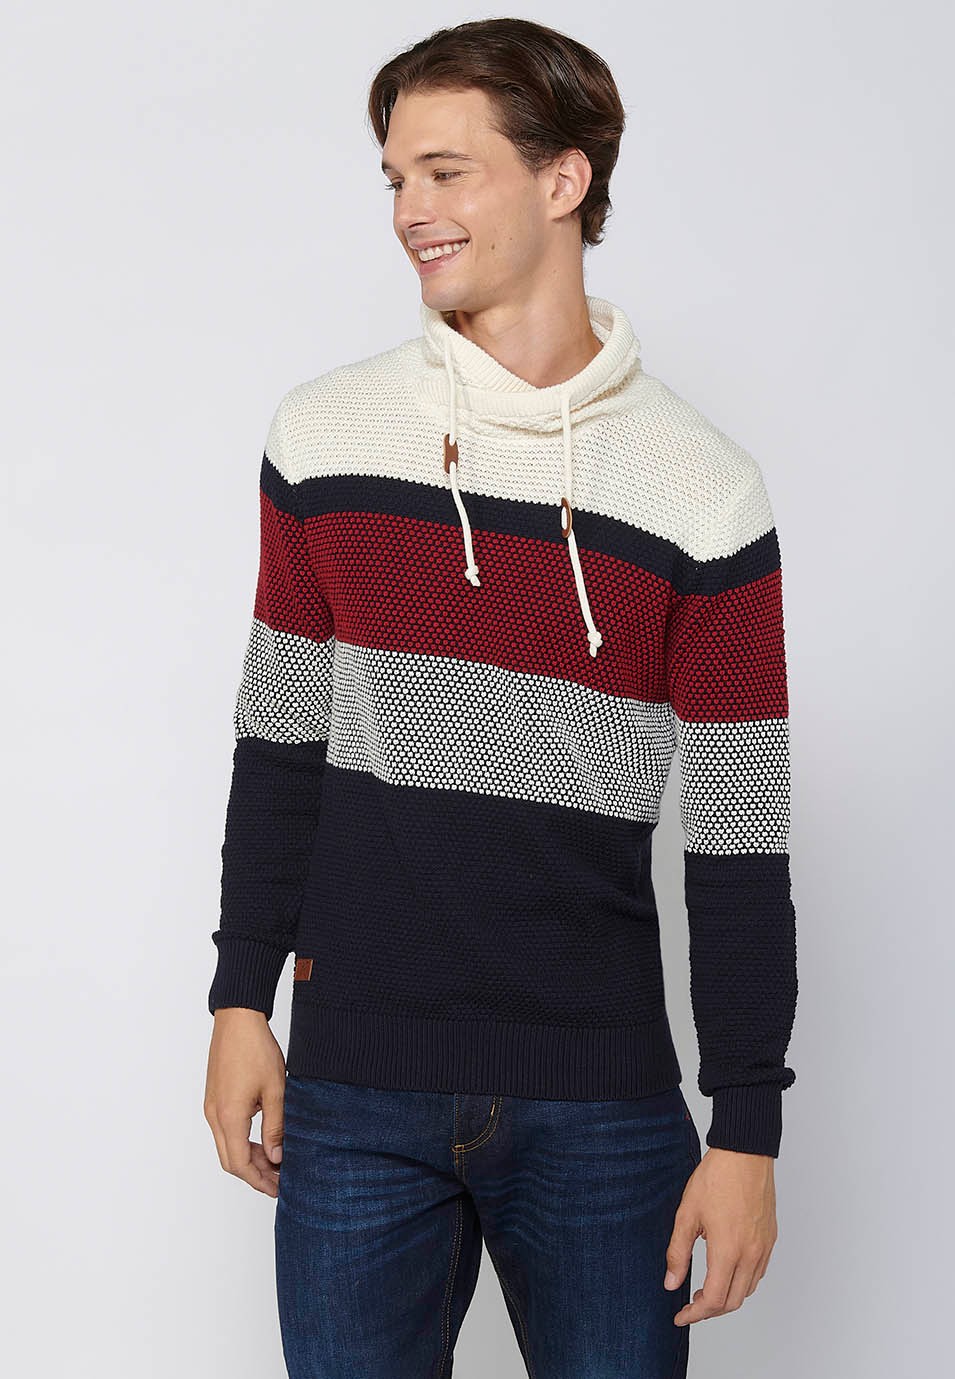 Long-sleeved sweater with adjustable turtleneck with drawstring, navy cotton textured striped tricot for men